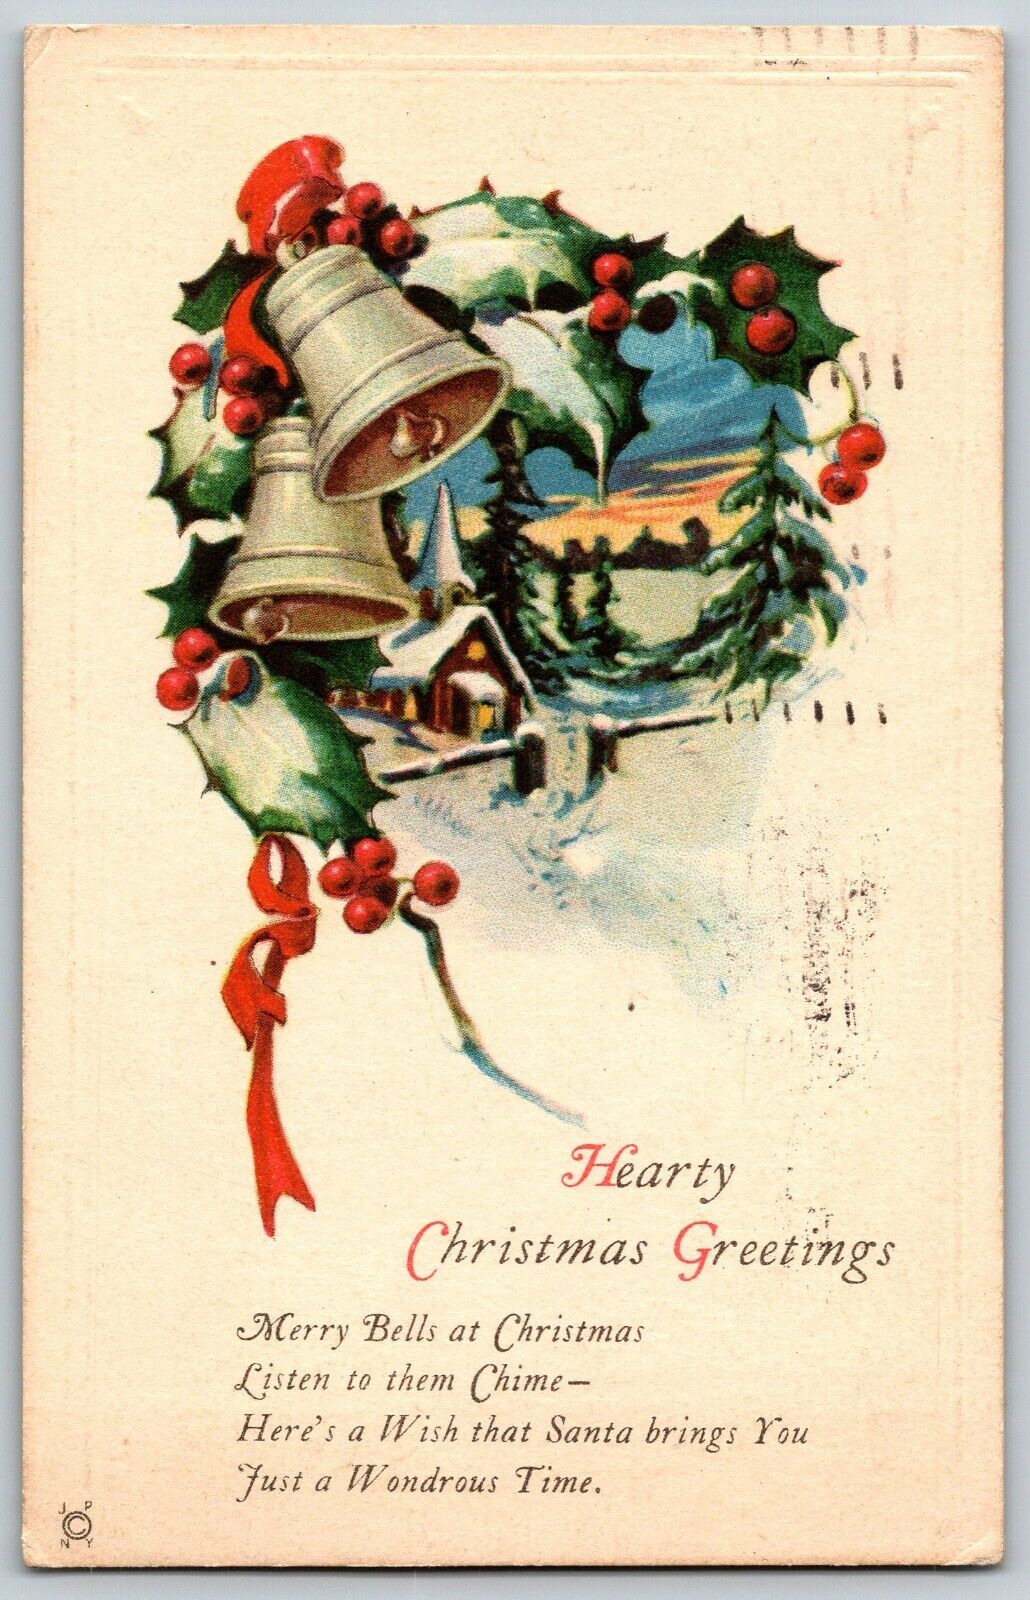 Hearty Christmas Greetings, Merry Bells at Christmas - Vintage Postcard Posted